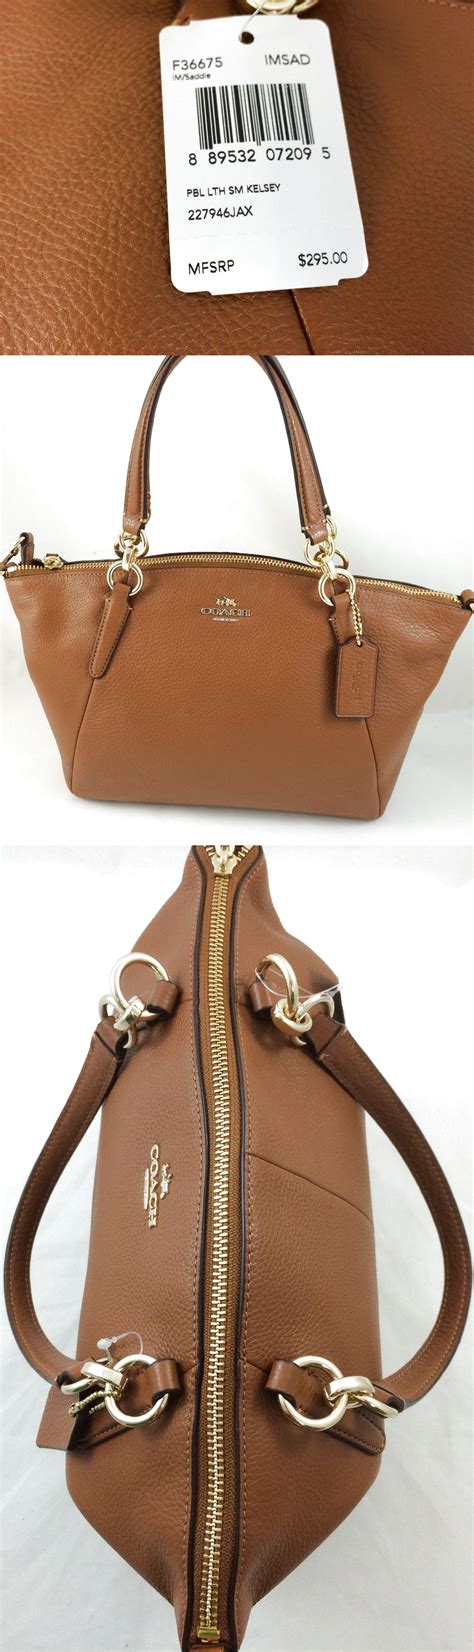 Coach F36675 Small Kelsey Satchel In Pebble Leather In Saddle For Sale